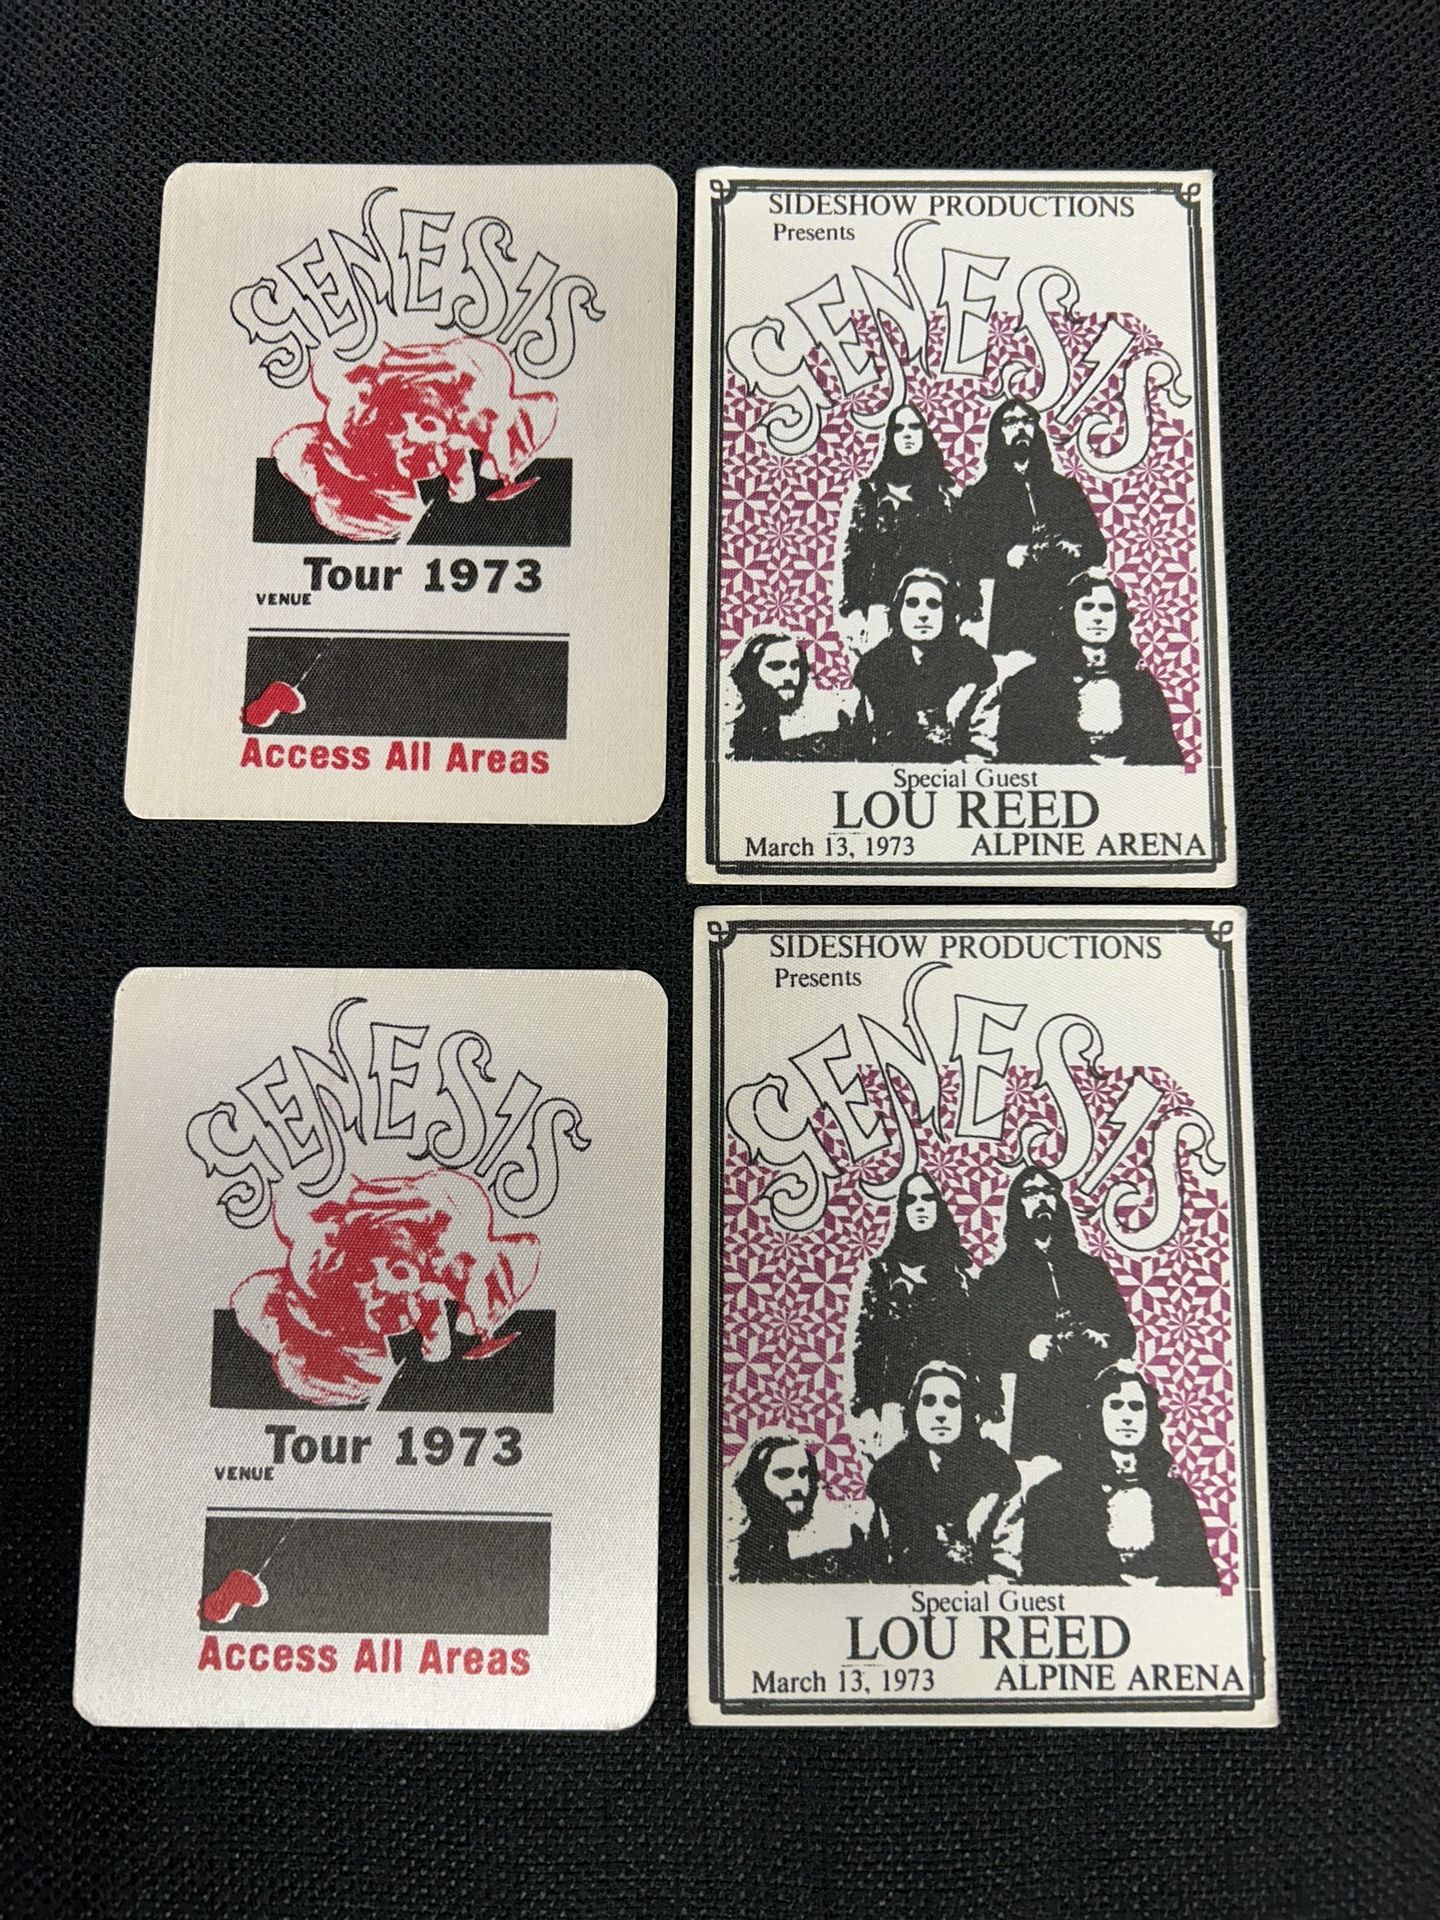 Vintage Genesis Back Stage Passes/Set Of 2/2 Sets Available